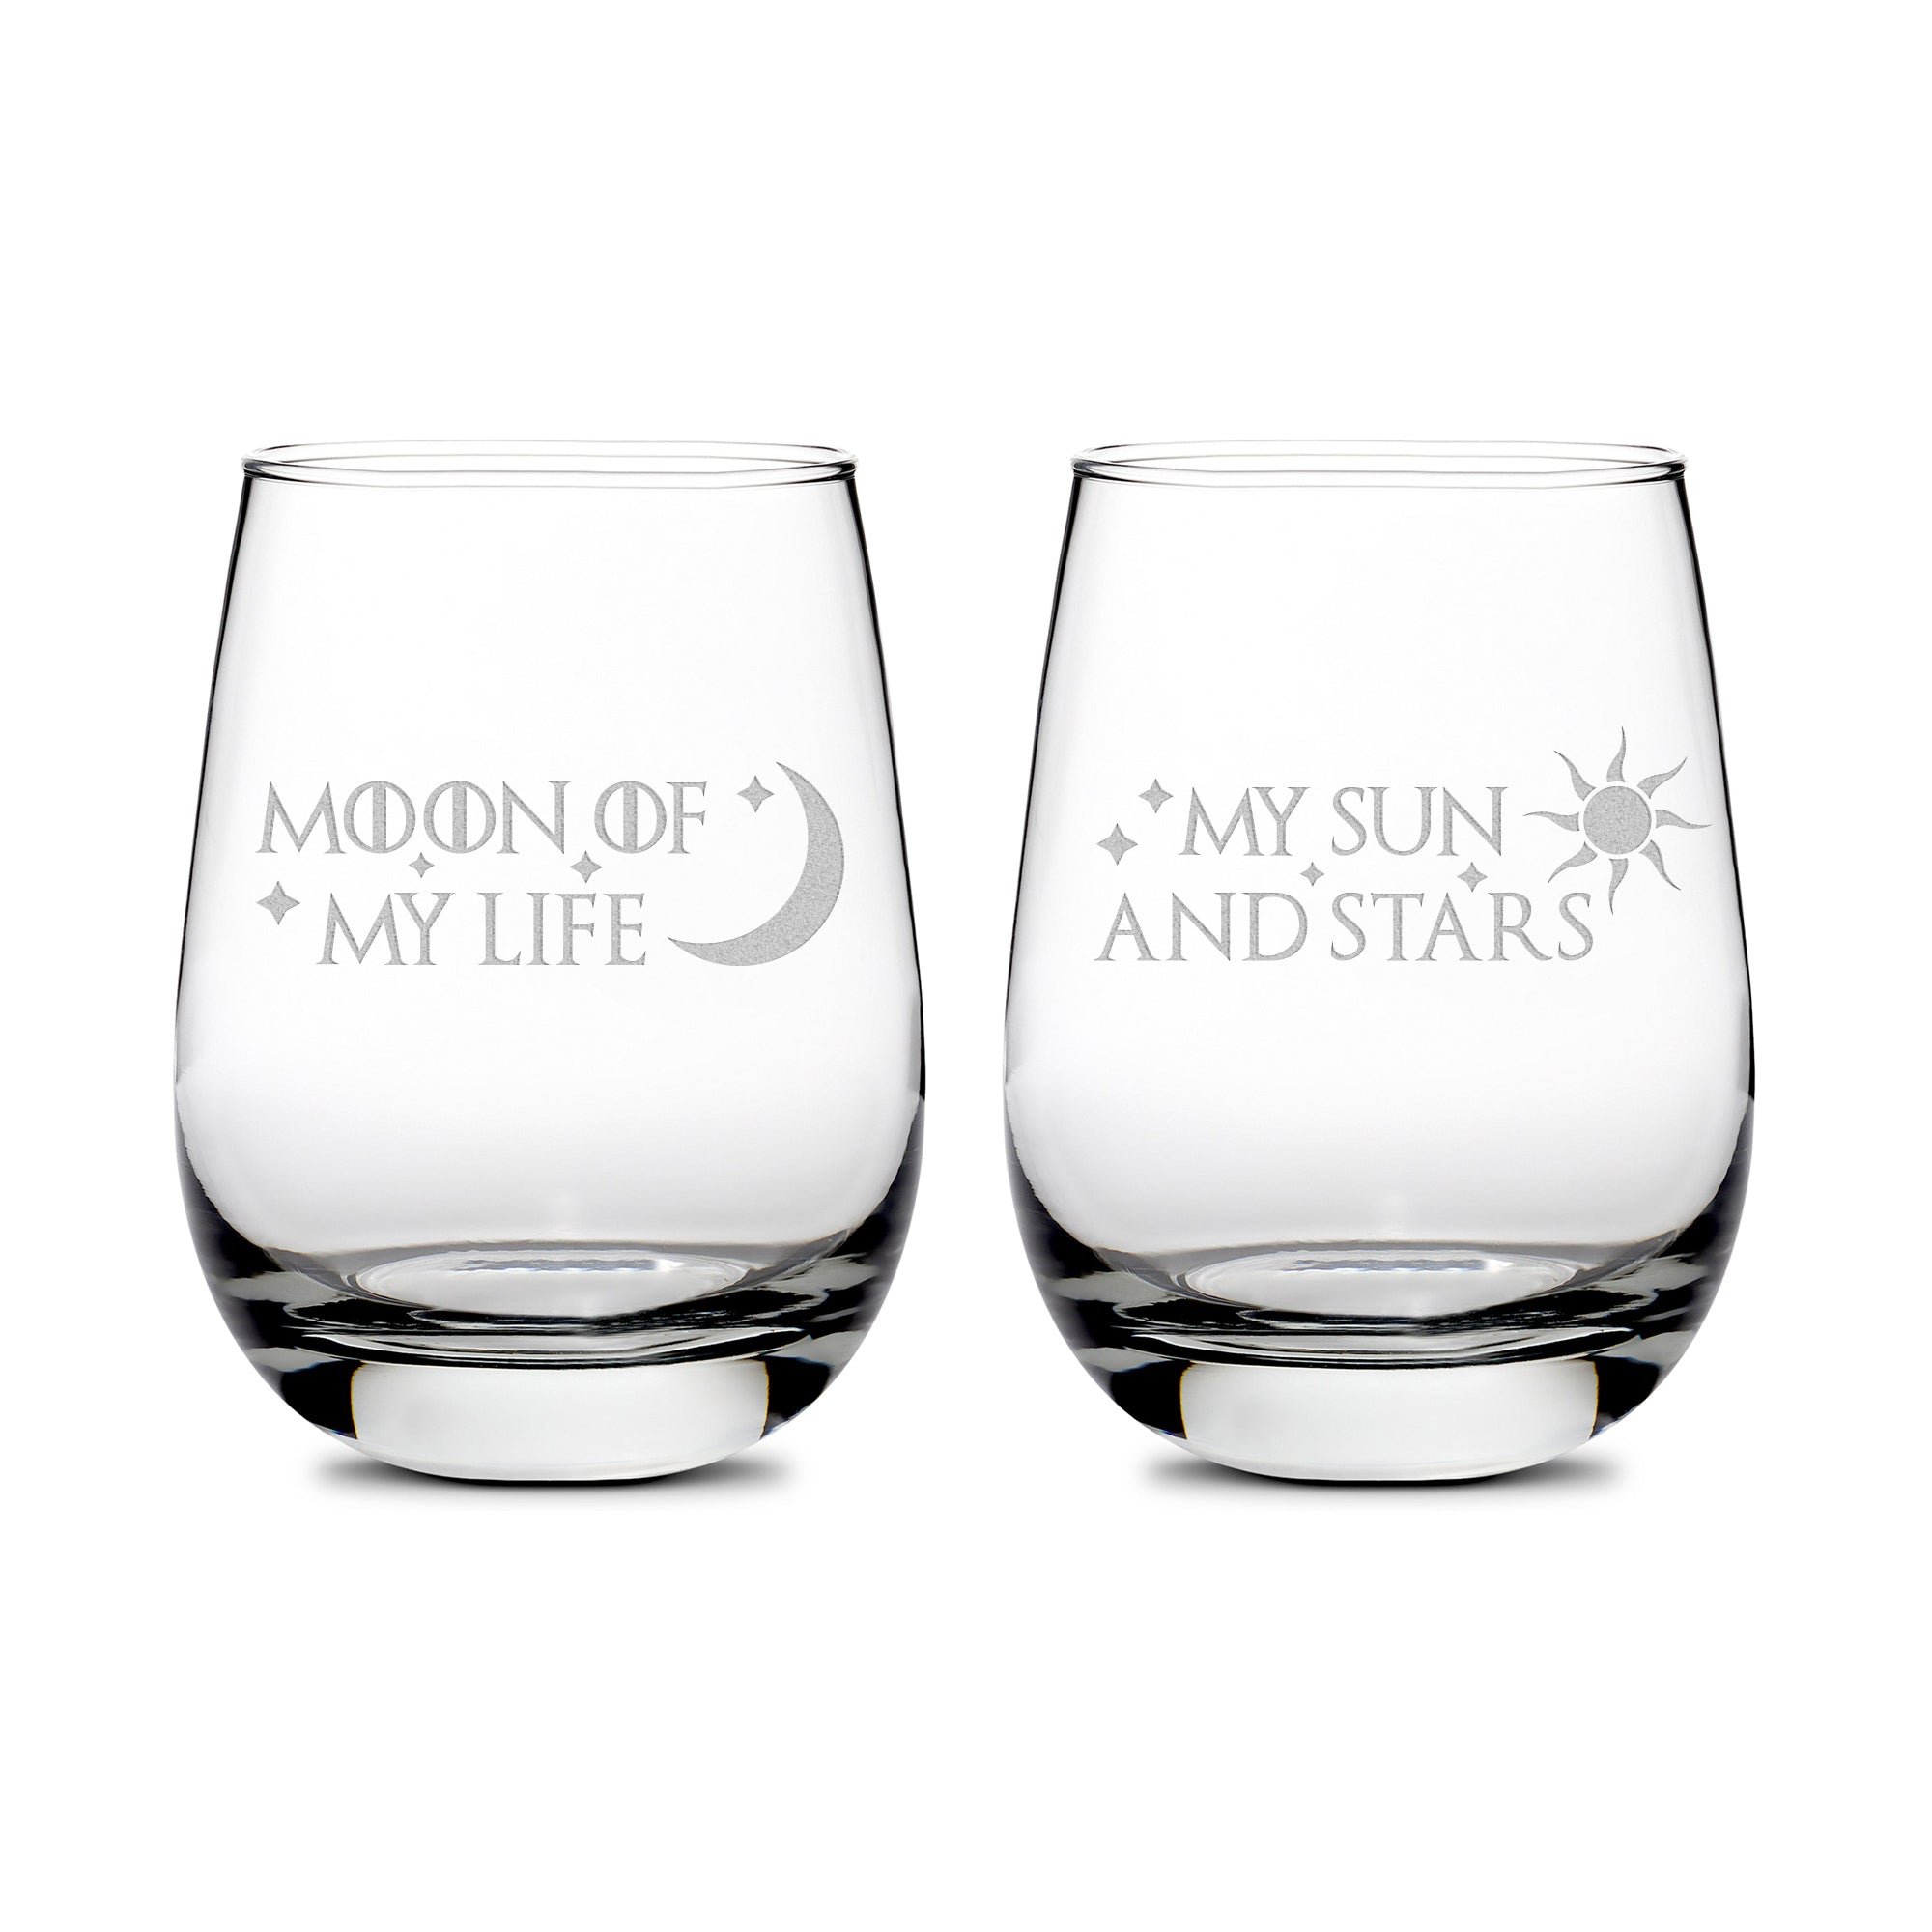 Premium Wine Glasses, Game of Thrones, Moon of My Life, My Sun and Stars, 16oz (Set of 2), Laser Etched or Hand Etched